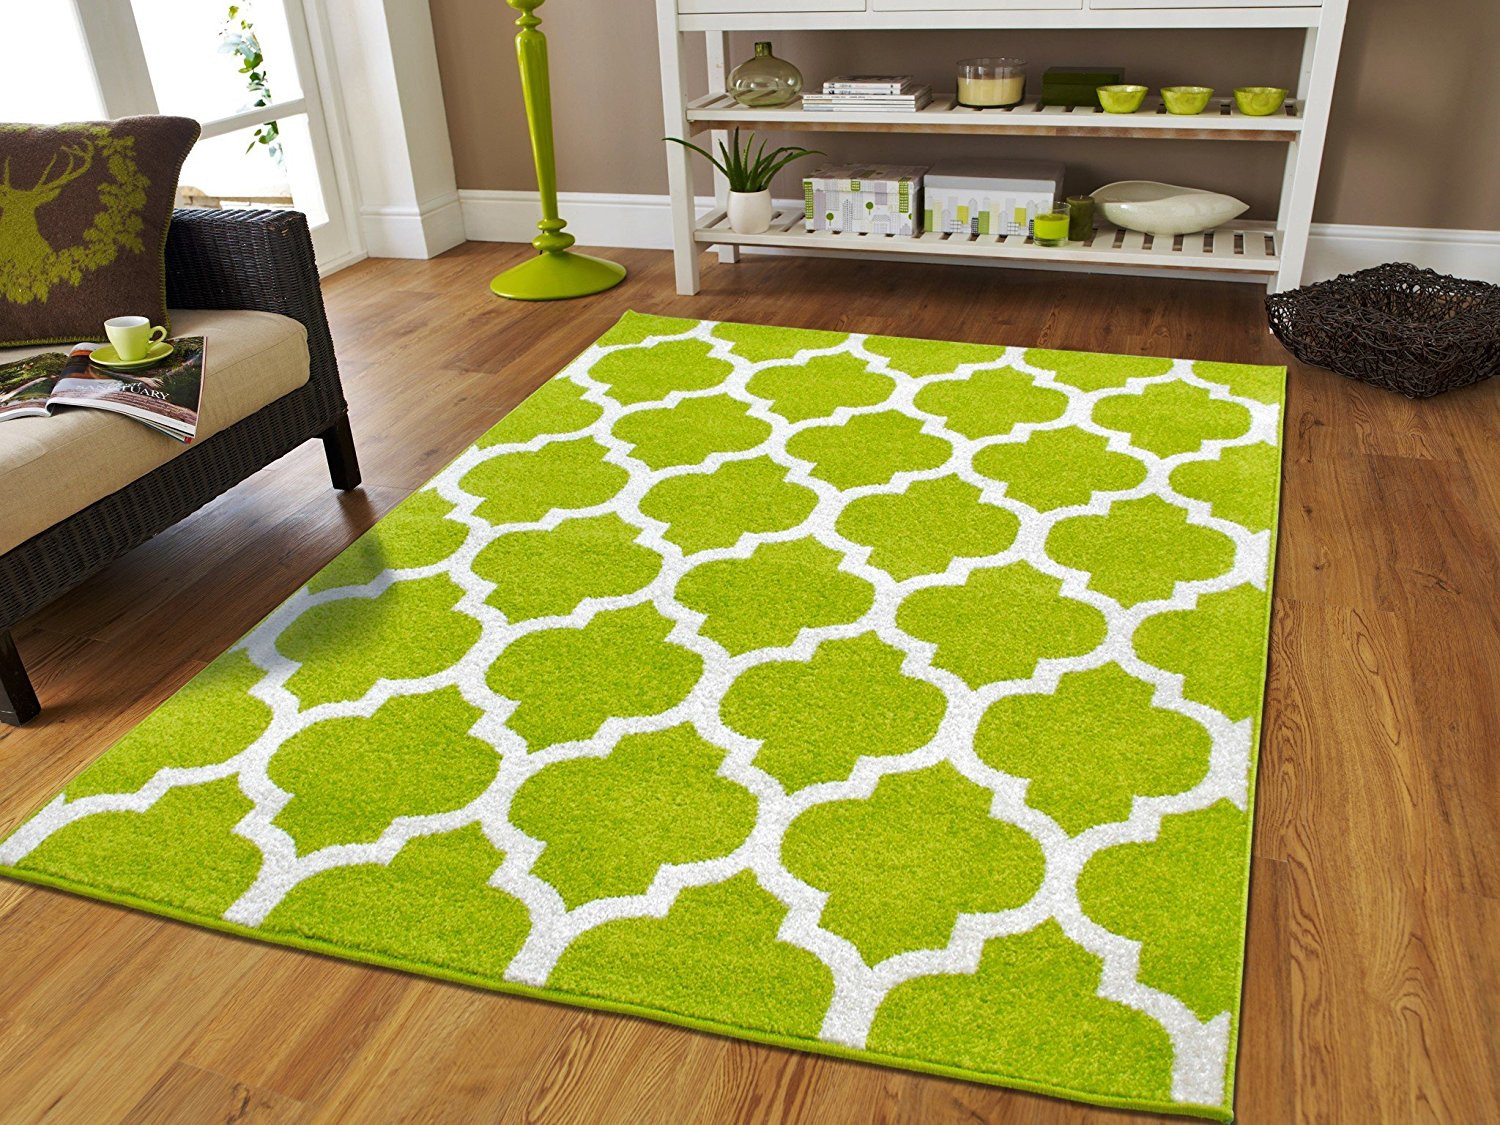 Green Rugs For Living Room
 Modern Green Area Rug For Bedrooms Green Rugs8x11